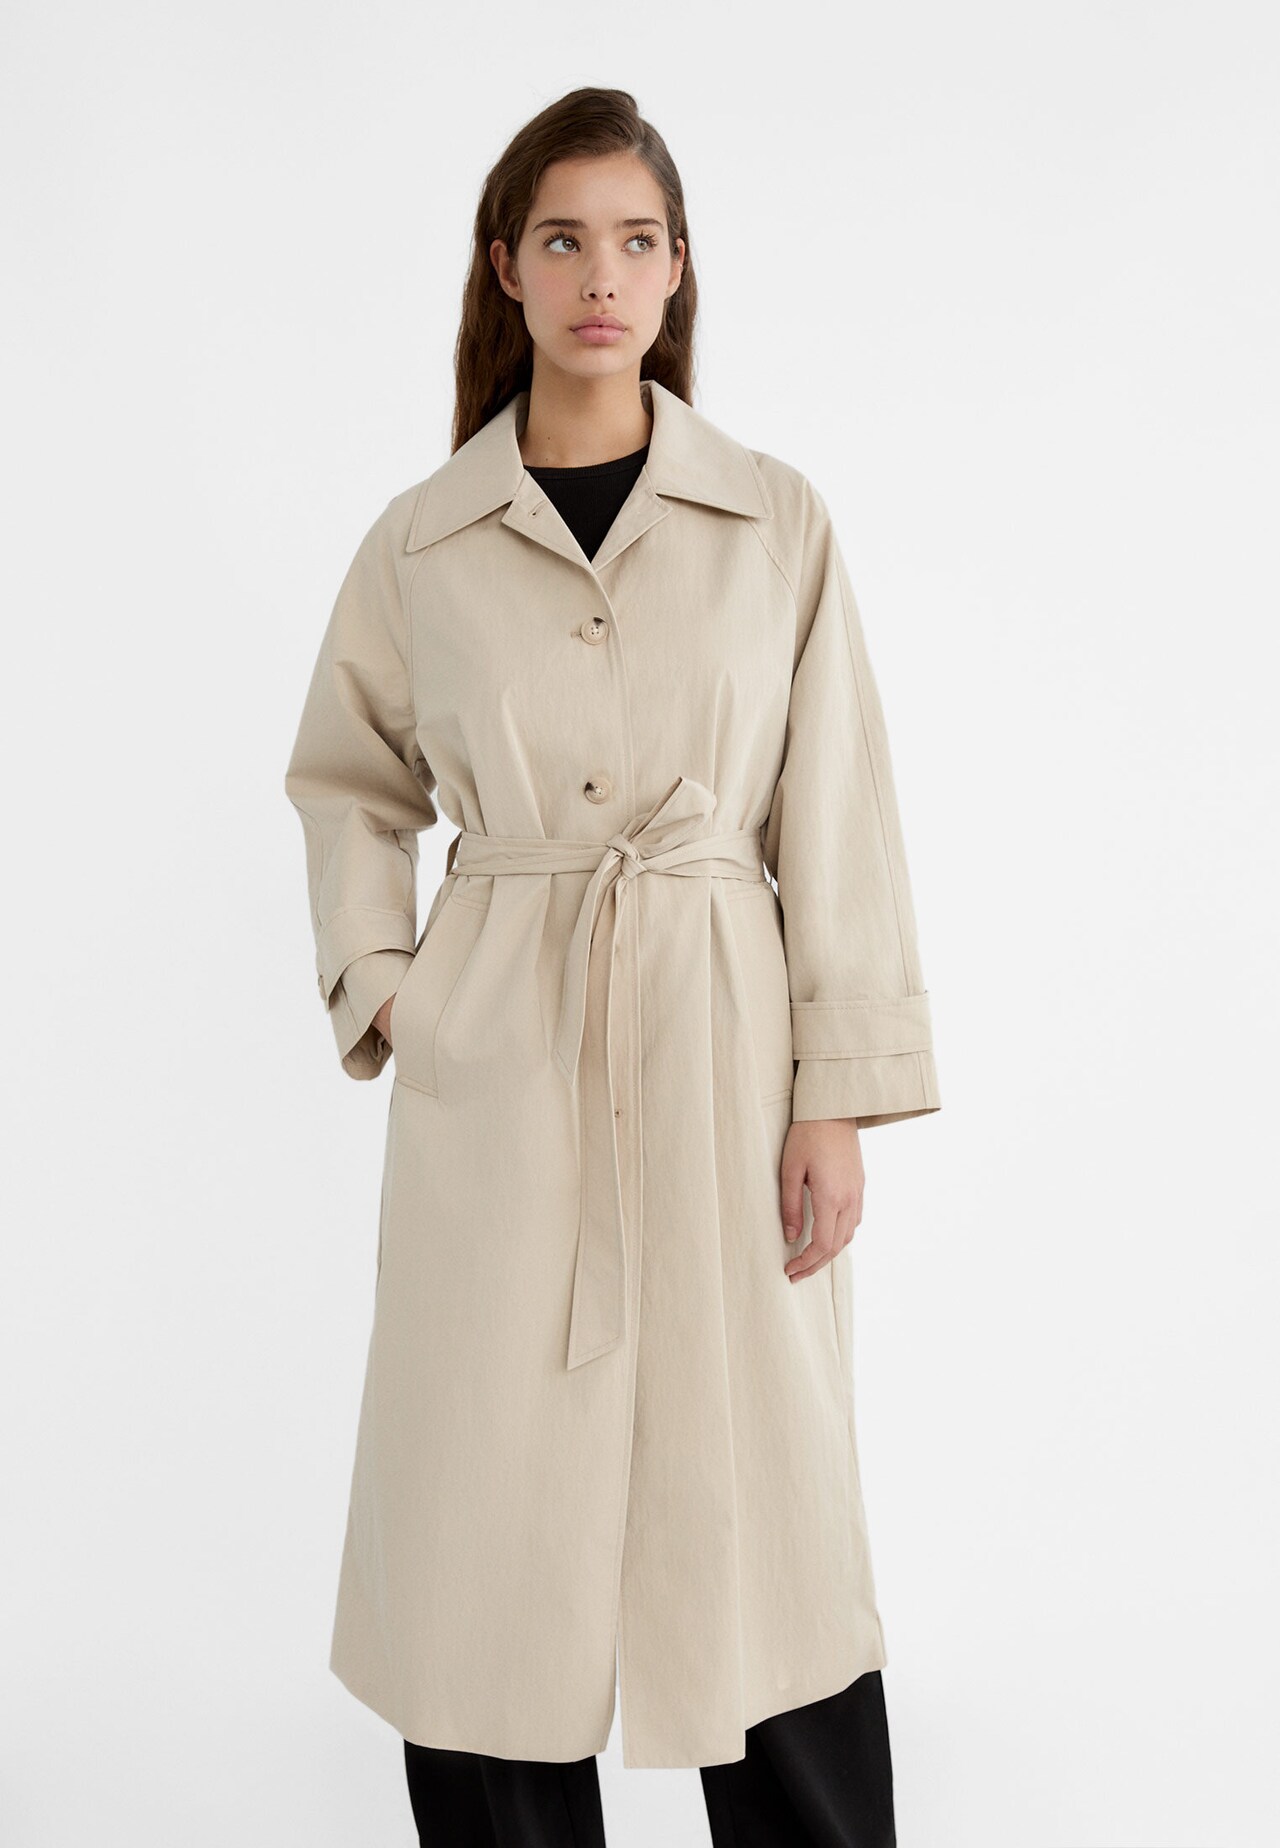 Long flowing trench coat with tabs - Women's fashion